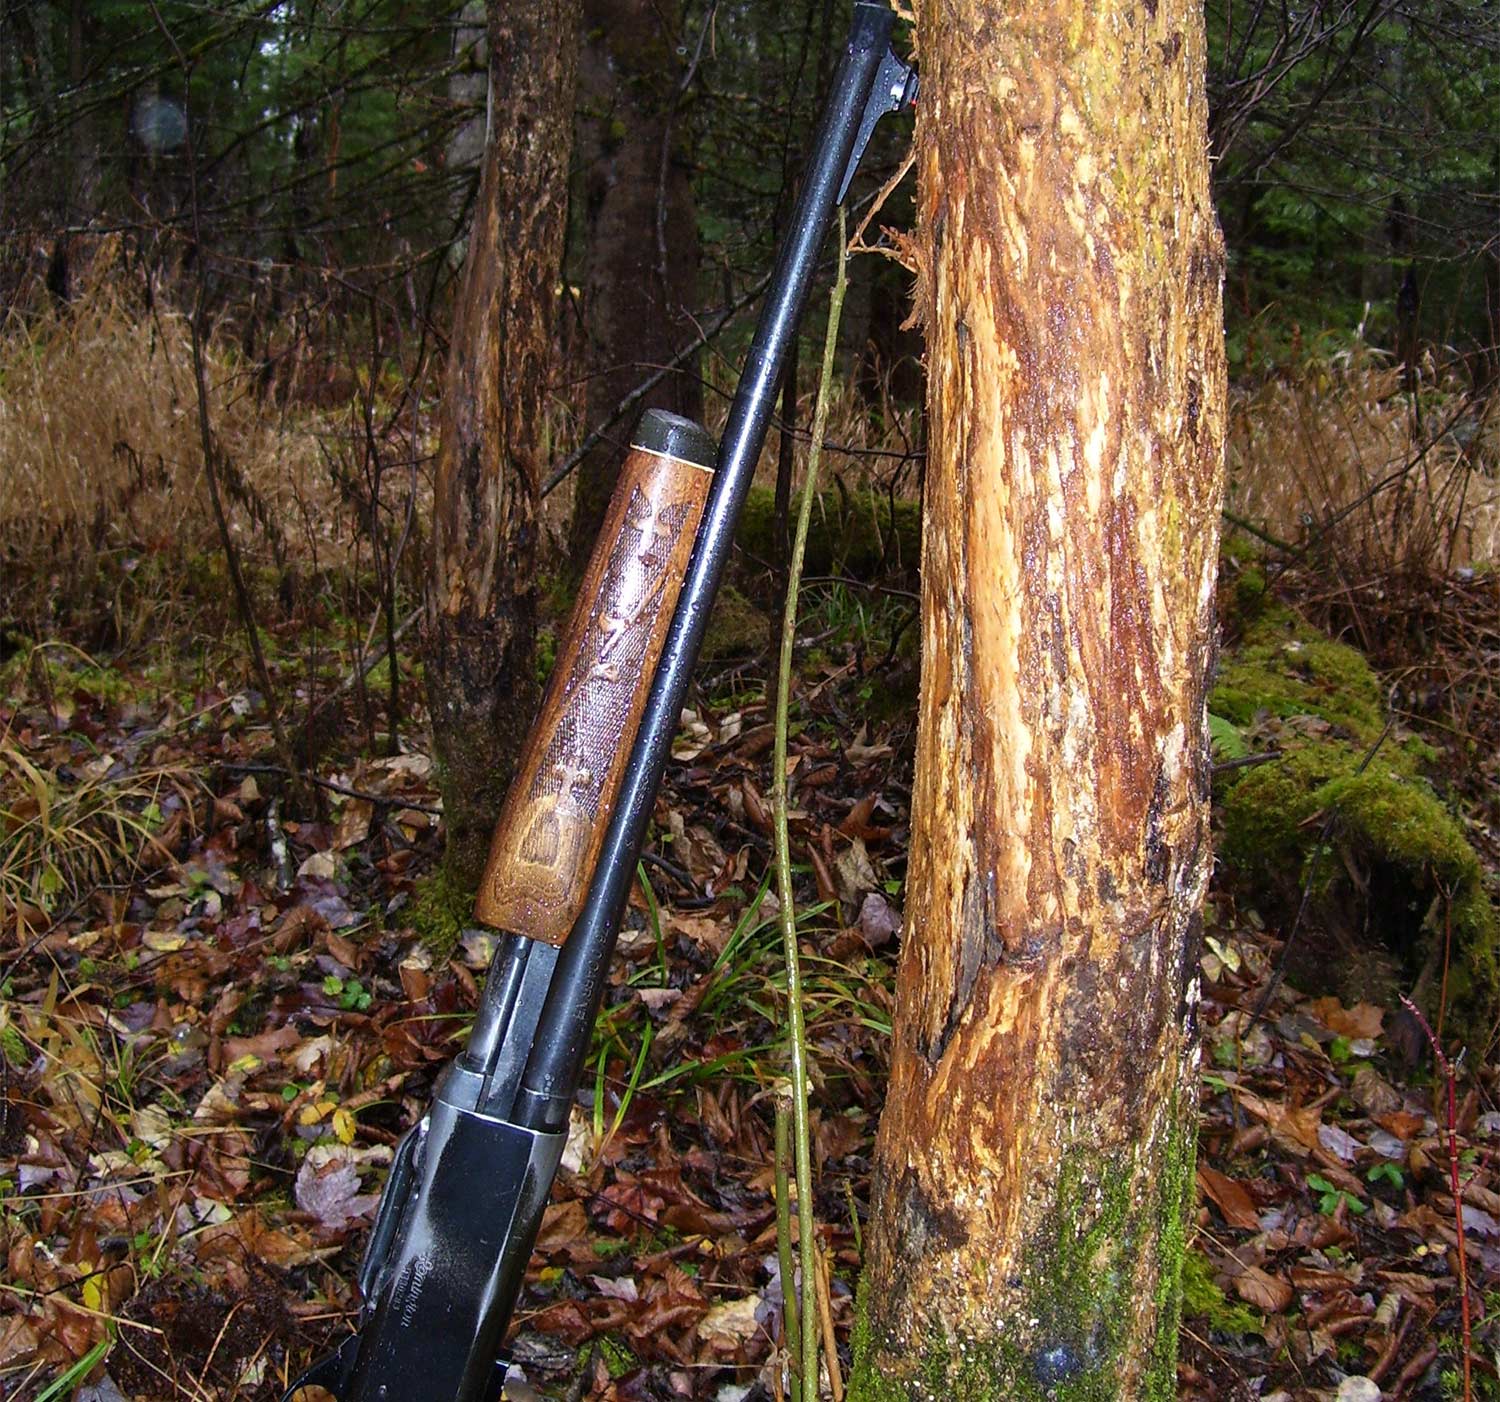 A rifle leans on the tree against a signpost rub on a tree.